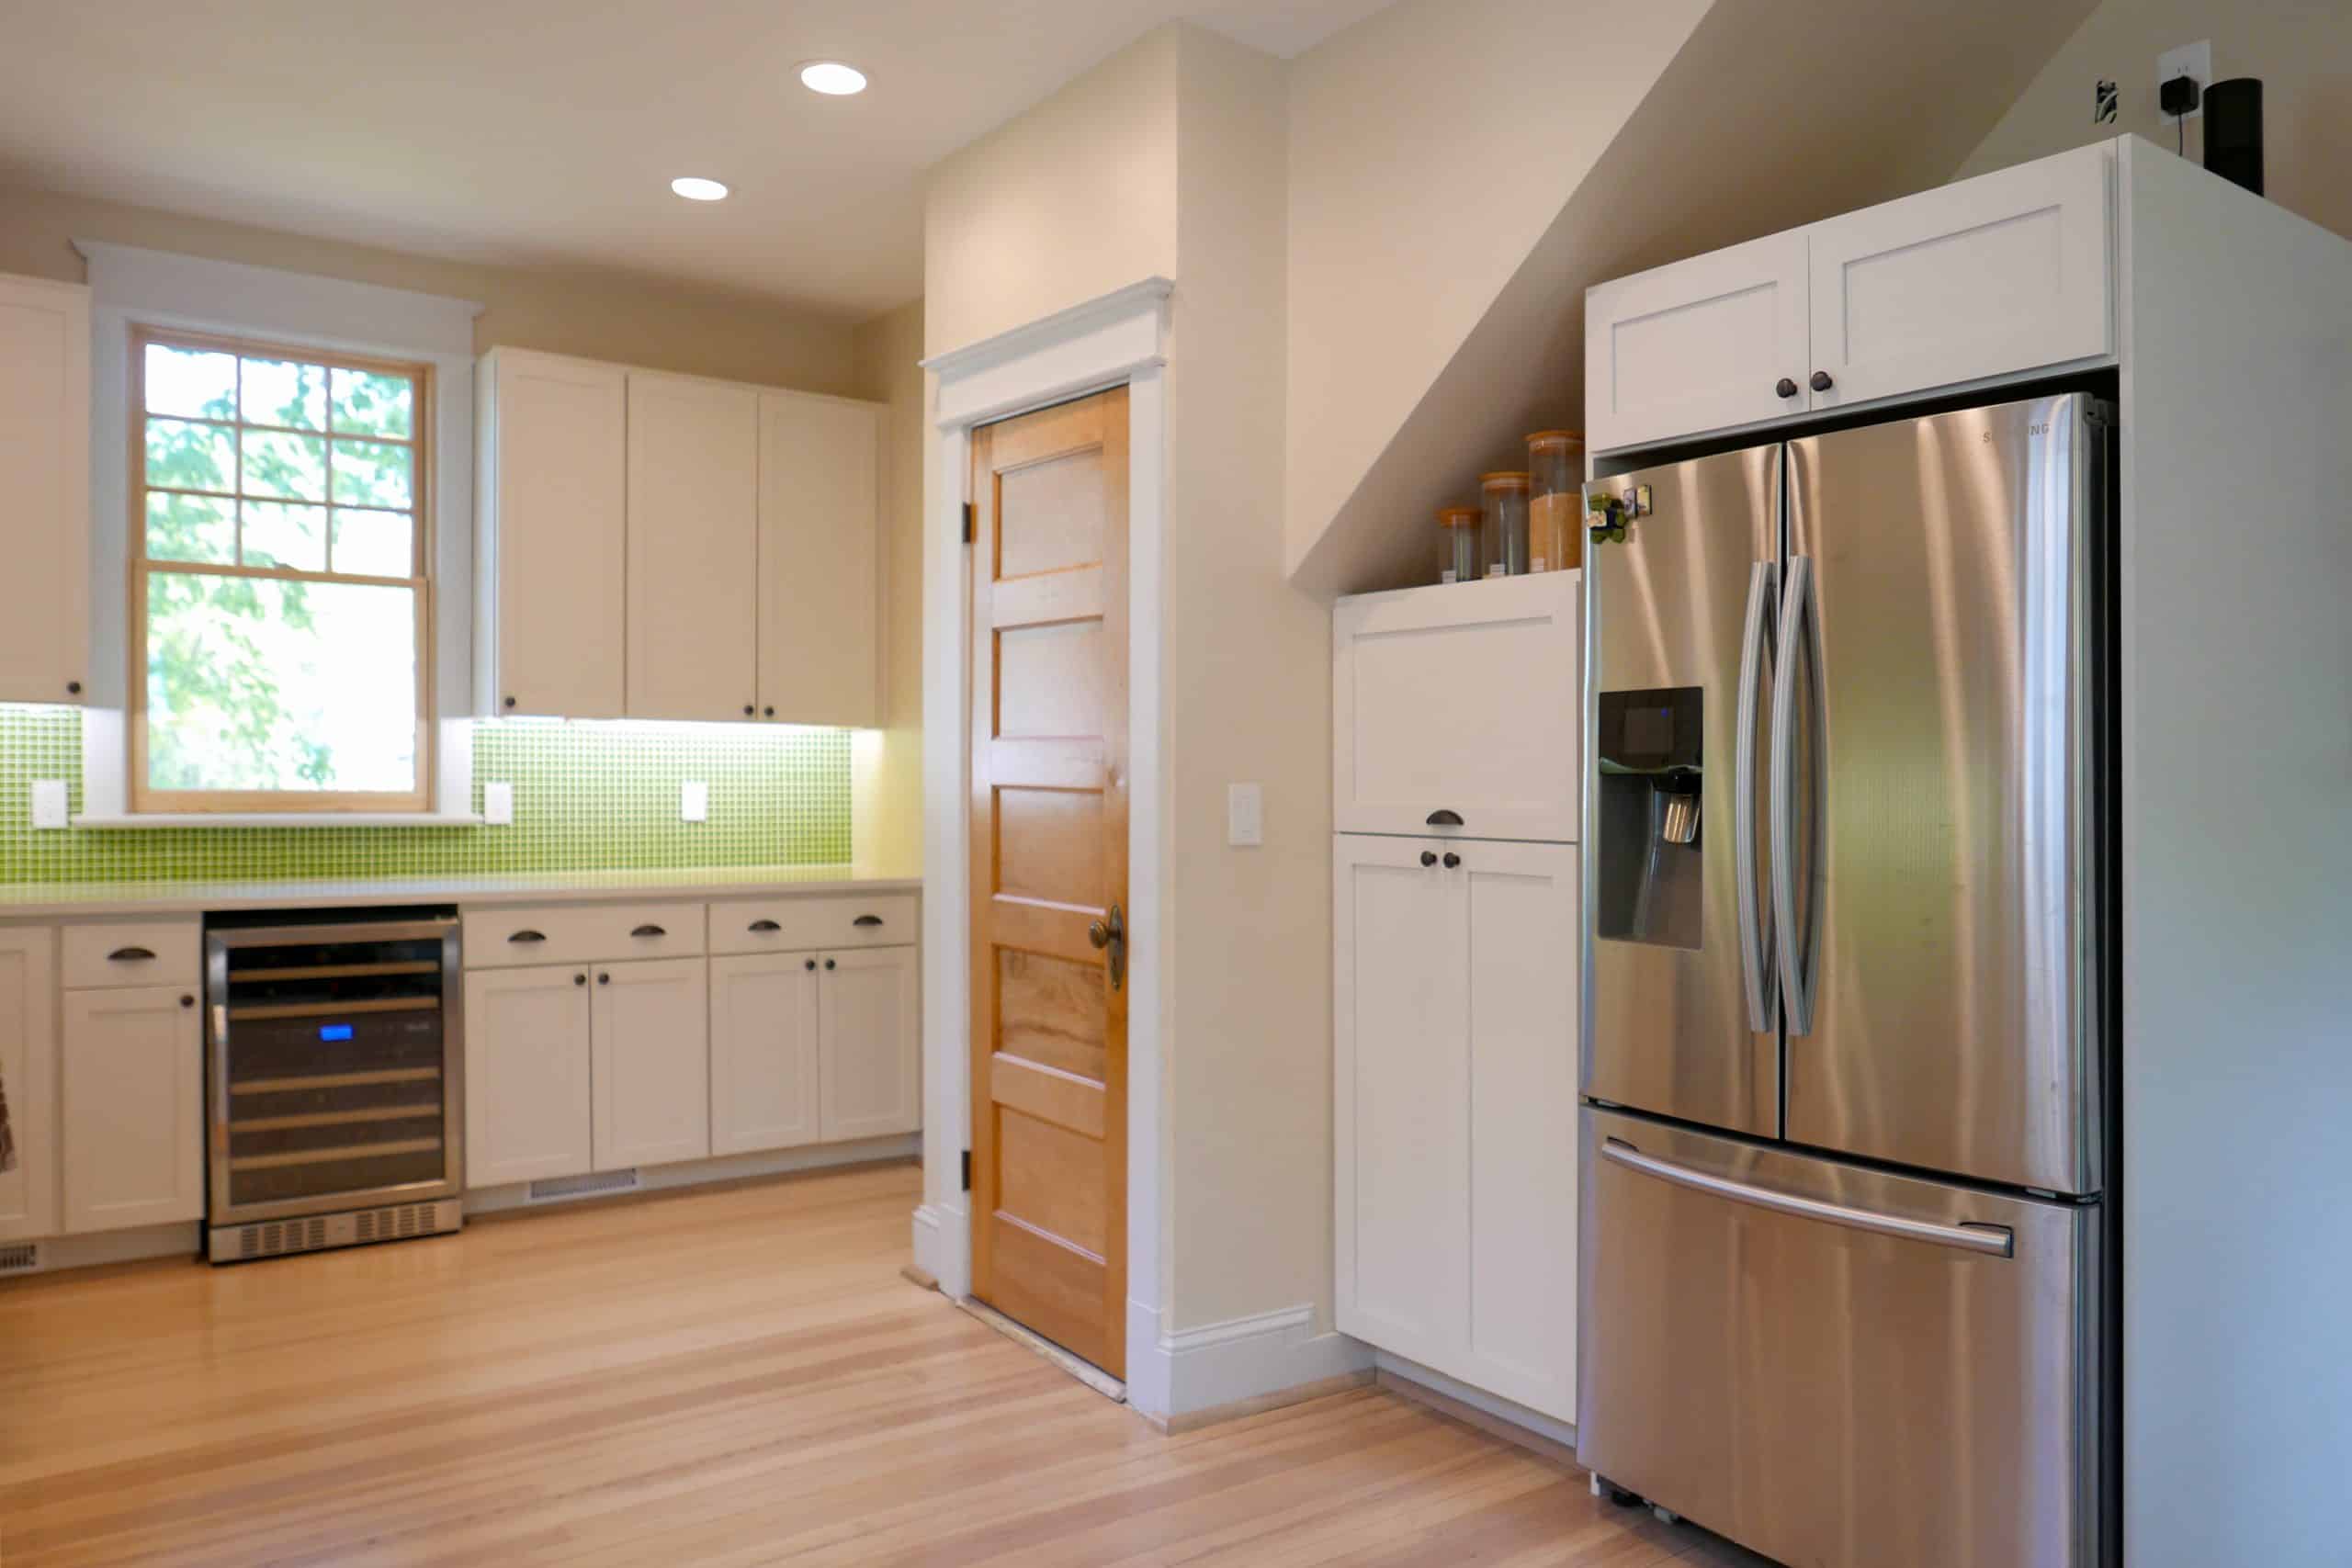 view of the Laurel residence kitchen refrigerator and wine fridge